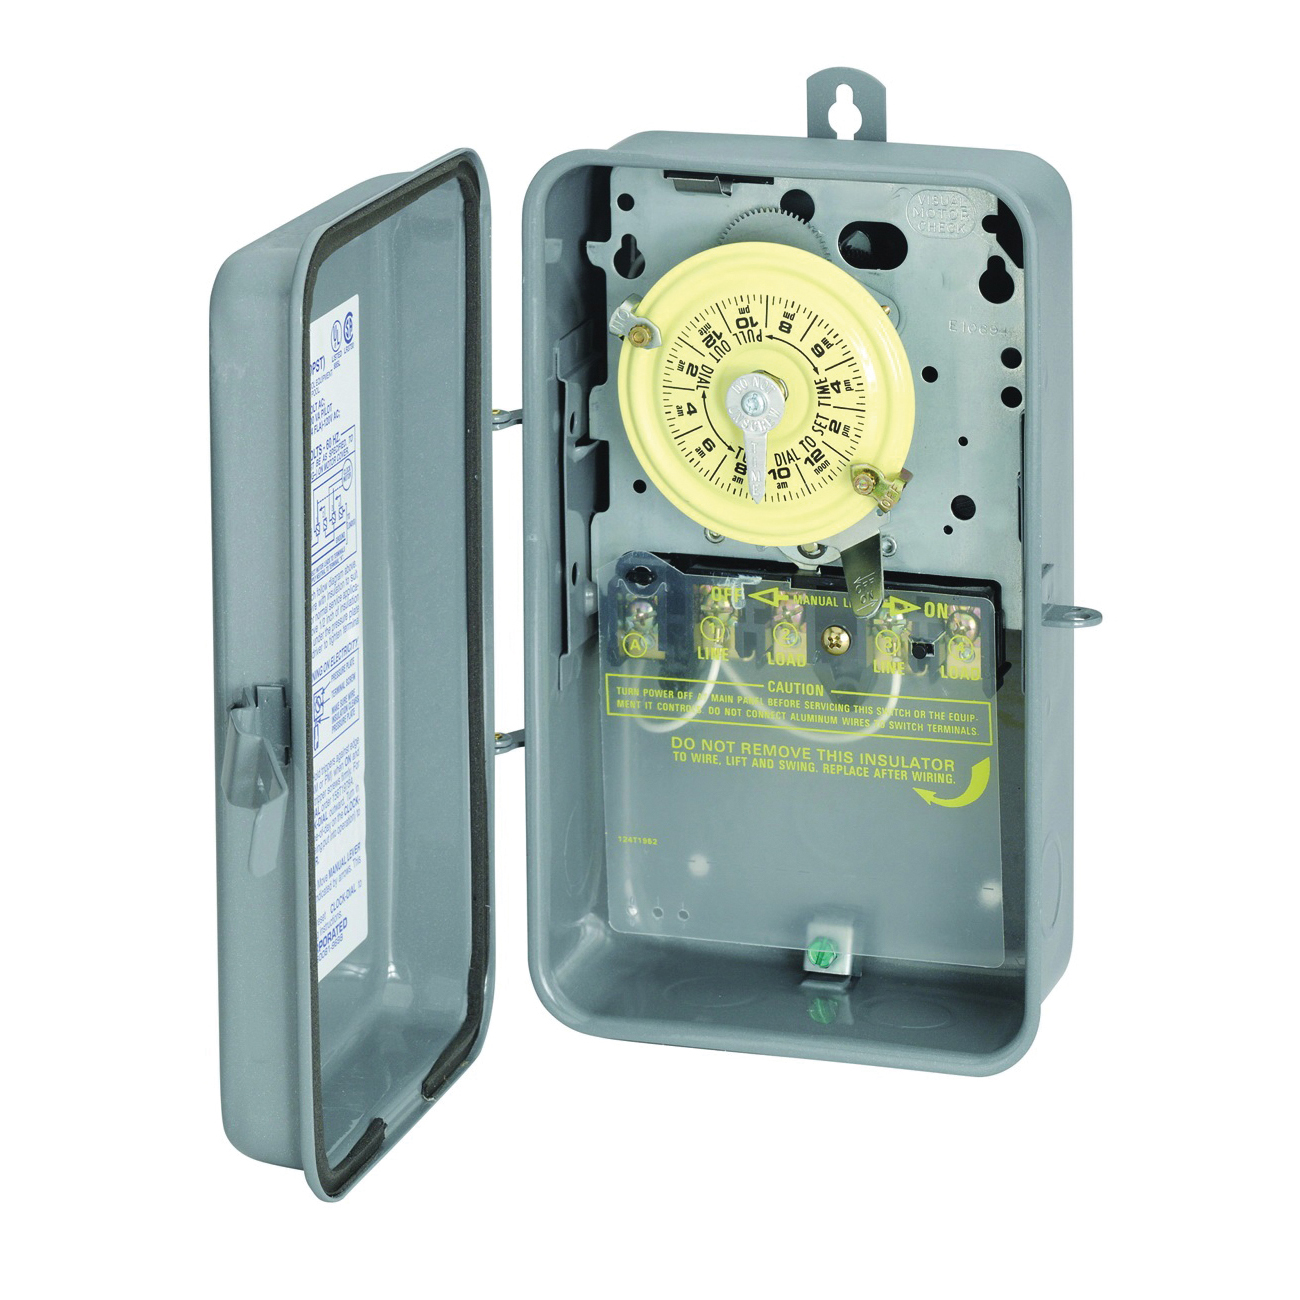 T104R Mechanical Timer Switch, 40 A, 208/277 V, 3 W, 24 hr Time Setting, 12 On/Off Cycles Per Day Cycle